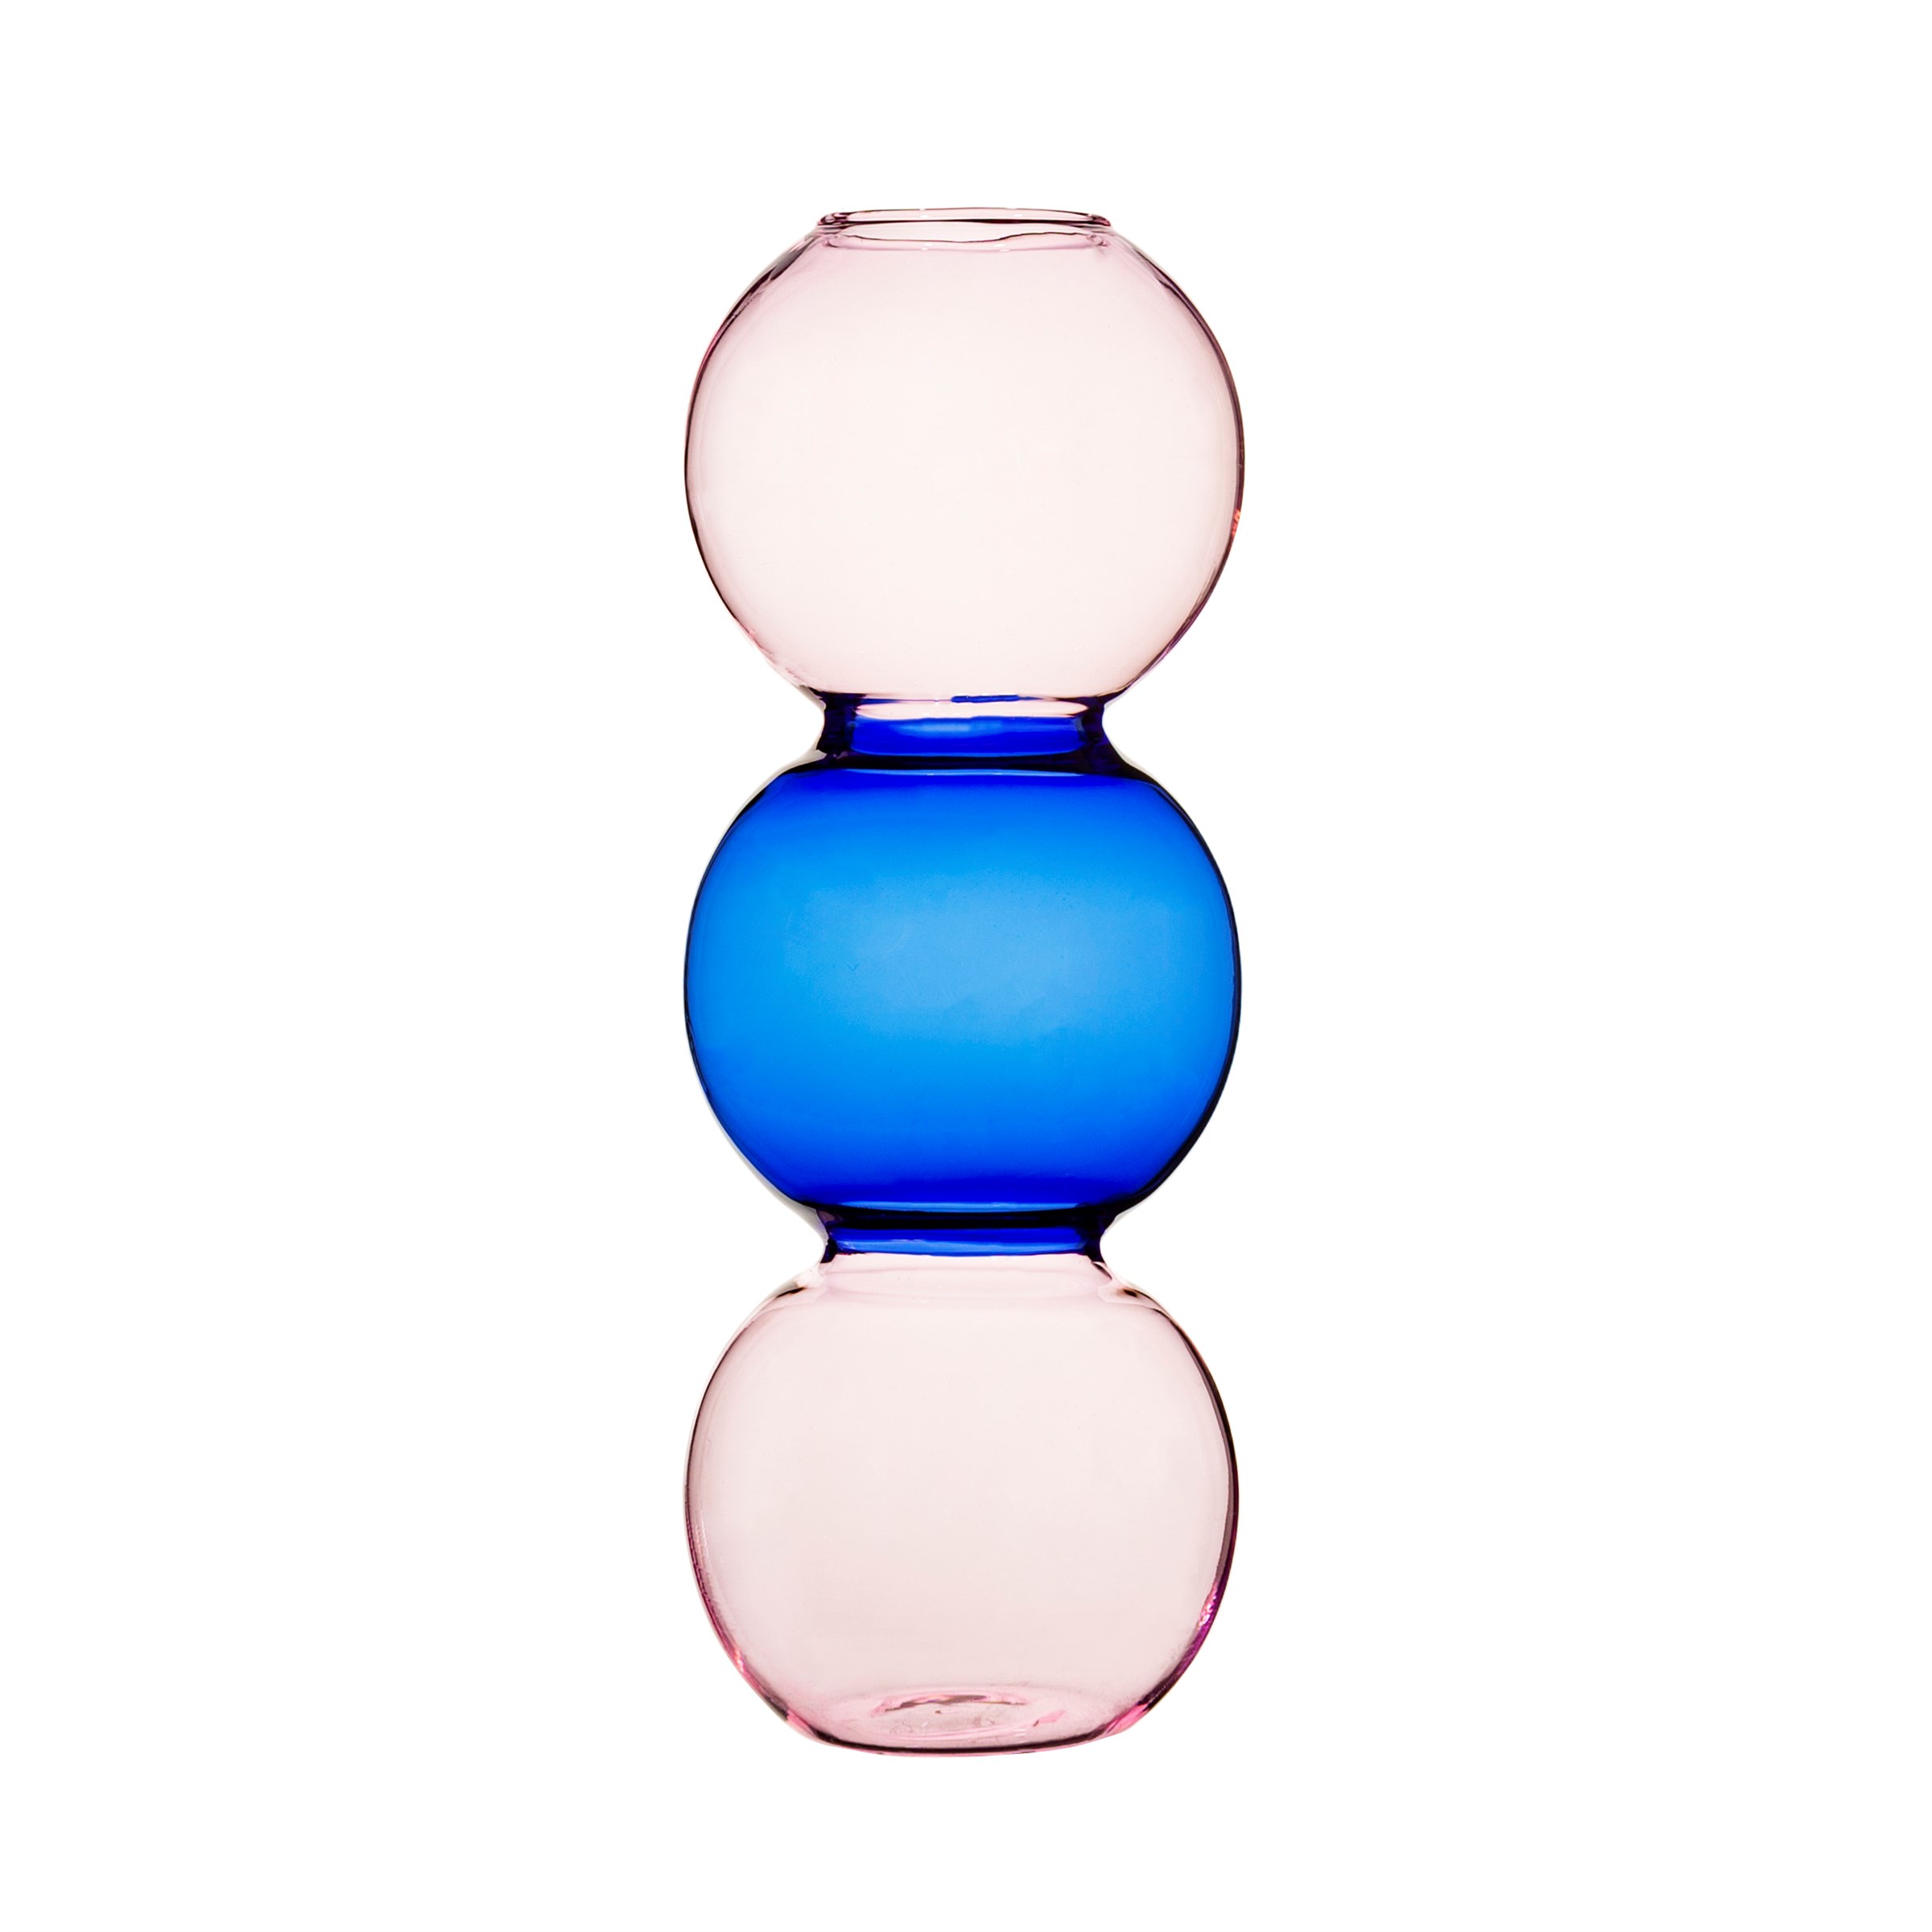 sass-and-belle-triple-bubble-glass-vase-blue-and-pink